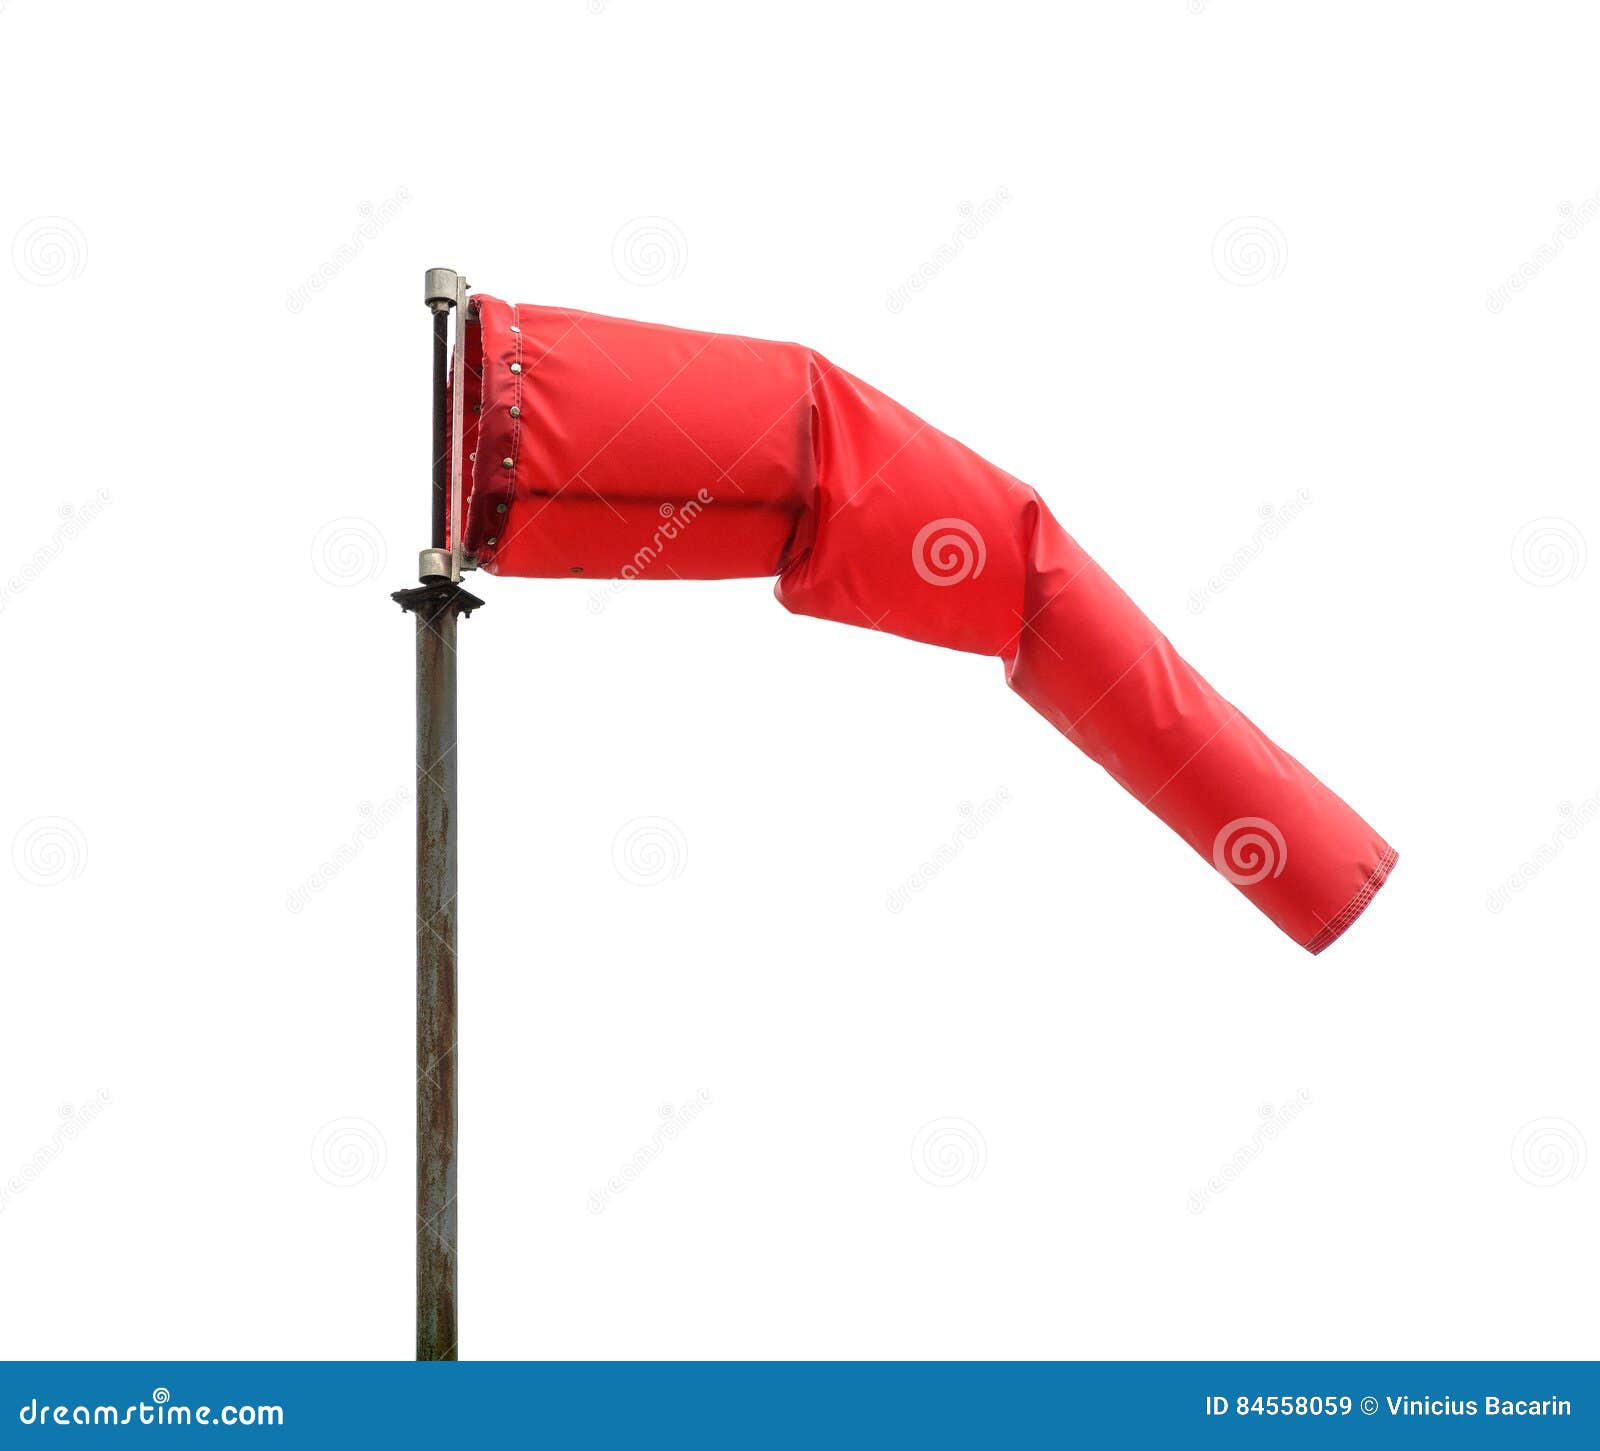 windsock poiting the position of the wind